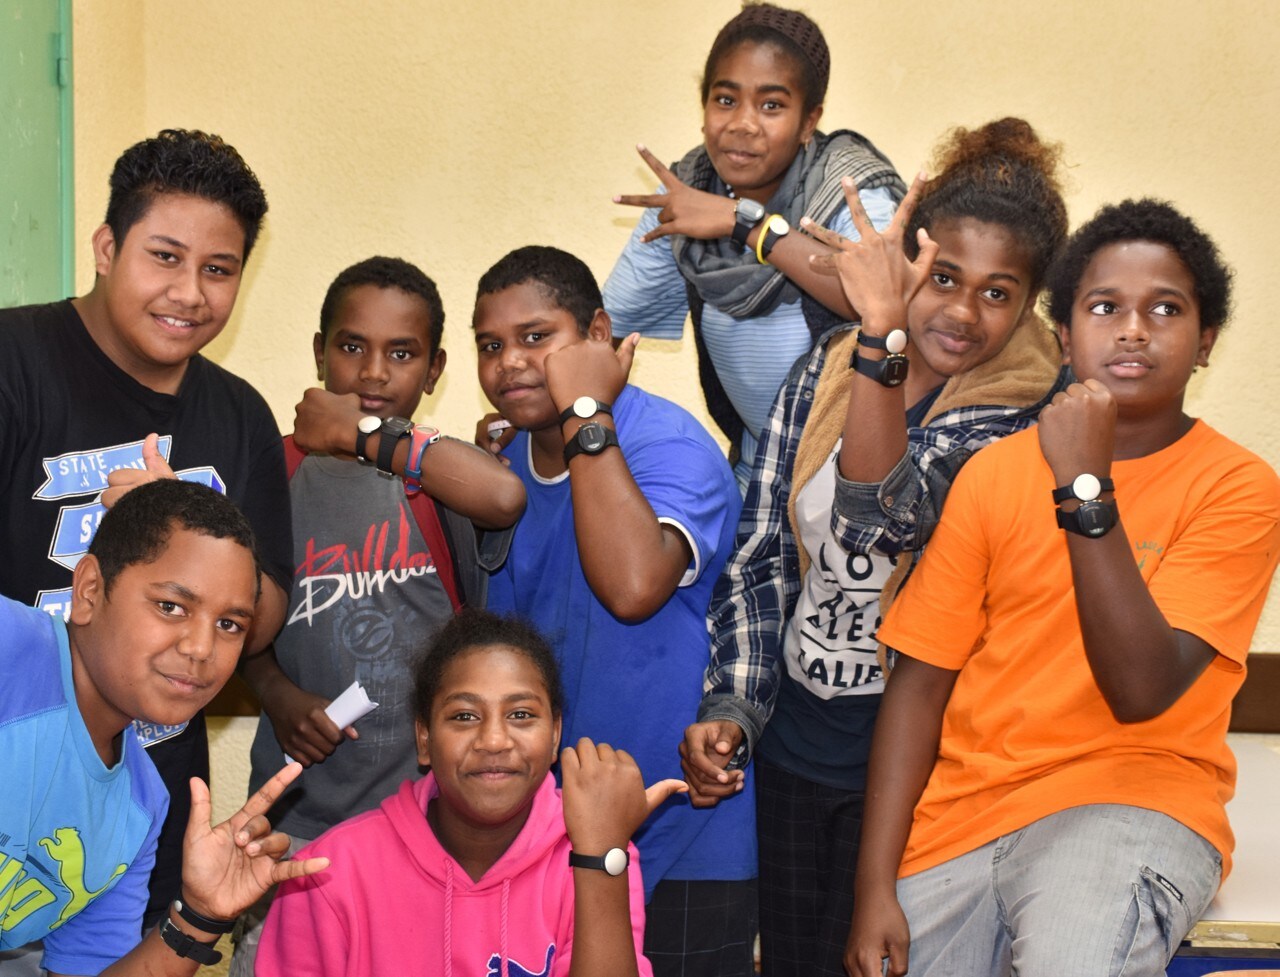 Group of Pacific children showing off digital trackers of their wrists